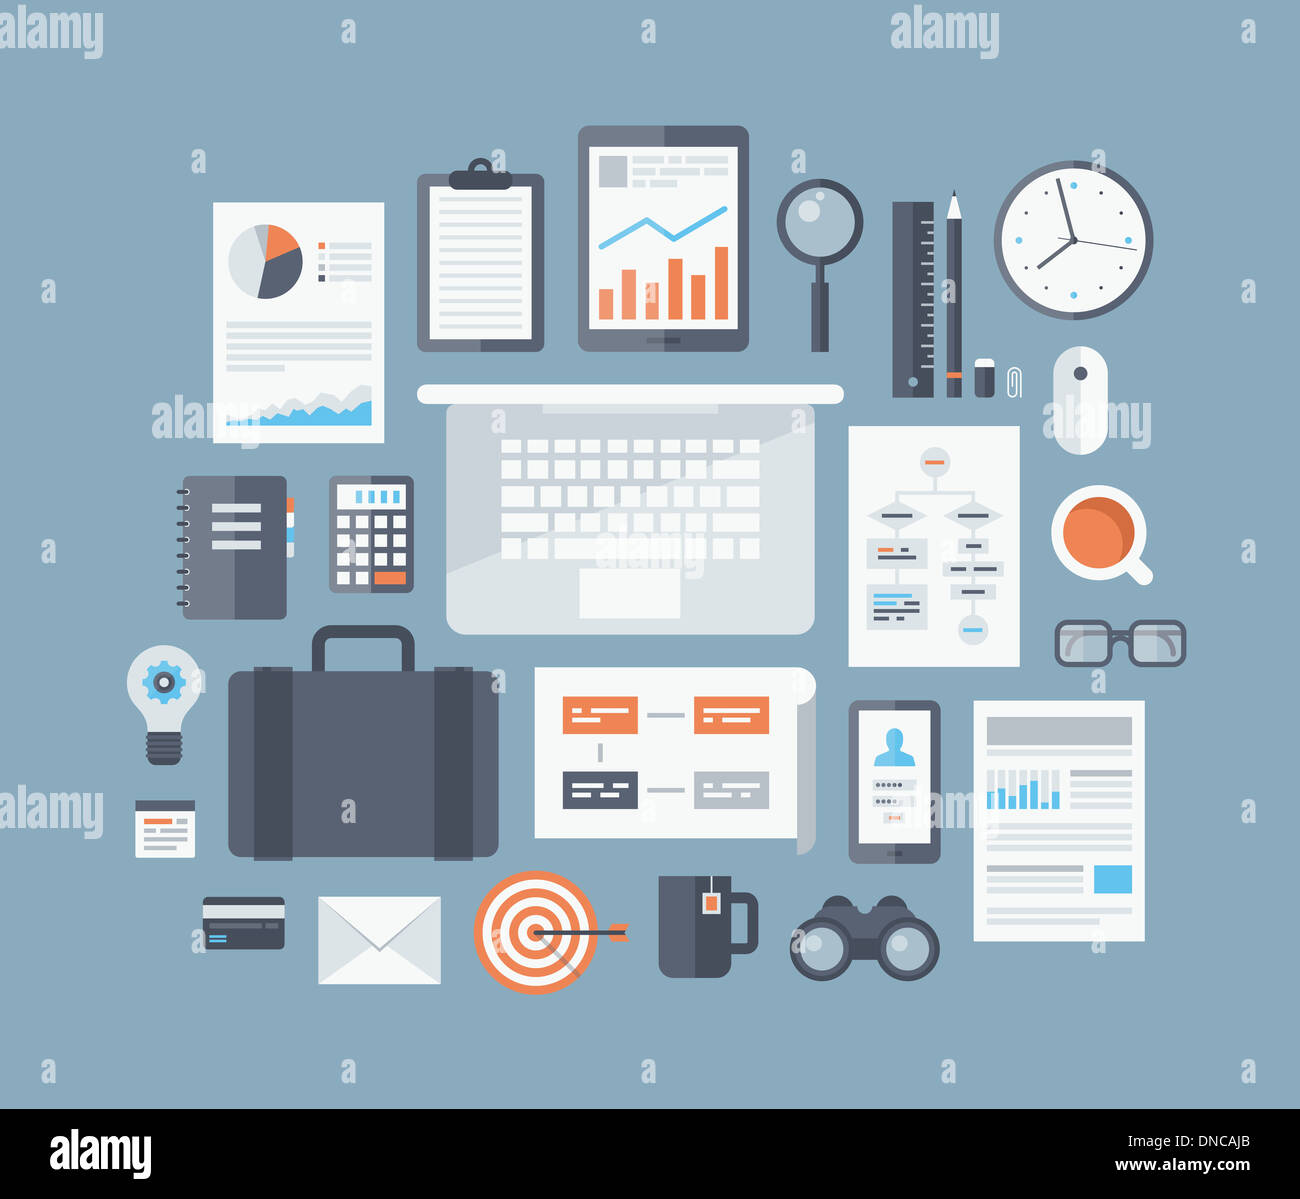 Modern design flat illustration concept of business workflow items and elements, office things and equipments Stock Photo